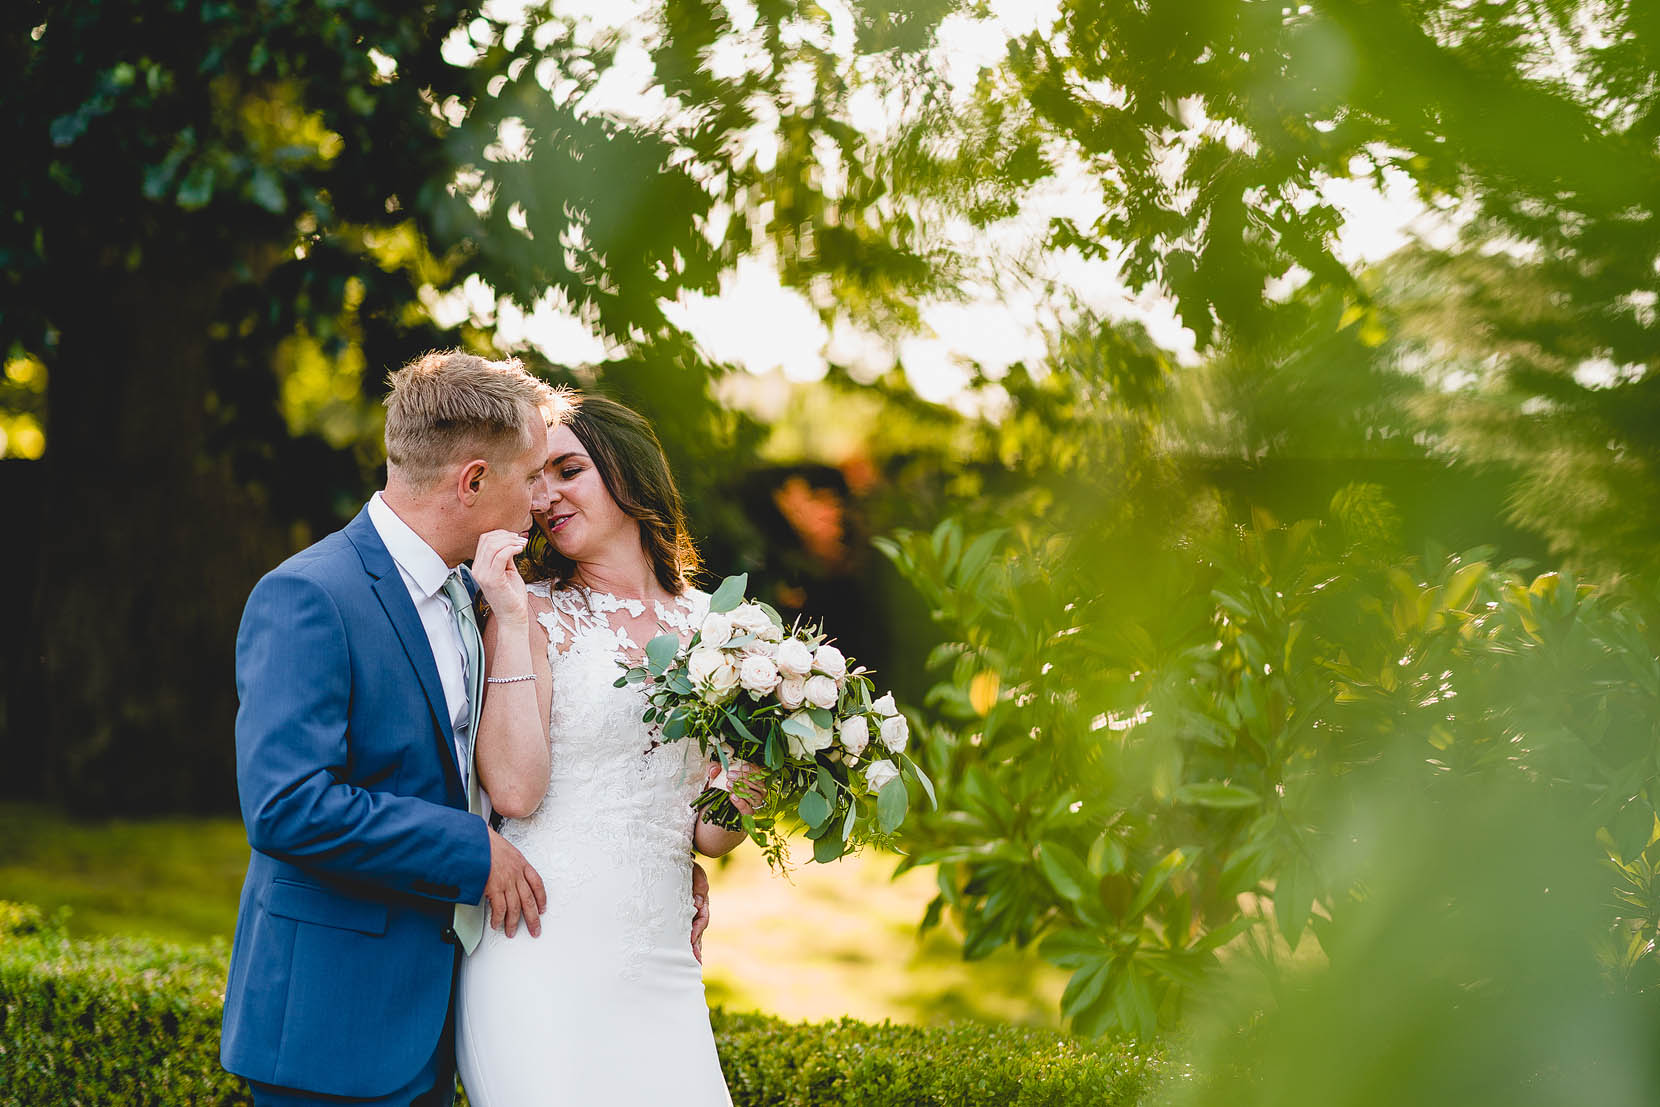 craig and hayley's wedding photography from southwood hall on a gorgeous Summer day